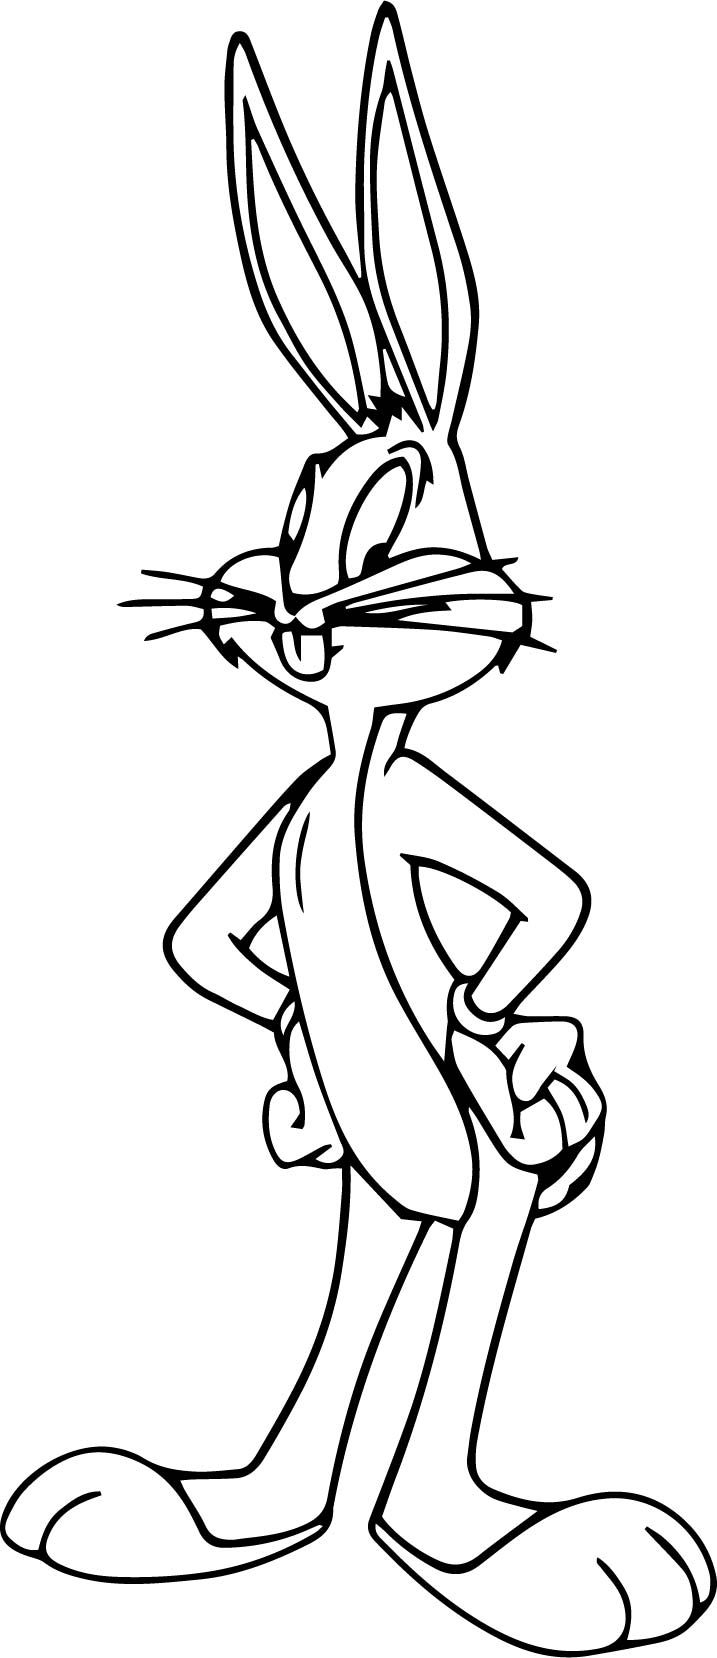 Bugs Bunny Coloring Pages Standing Bunny Coloring Pages Bugs Bunny Drawing Bugs Bunny - Free Printable Bugs Bunny Coloring Pages